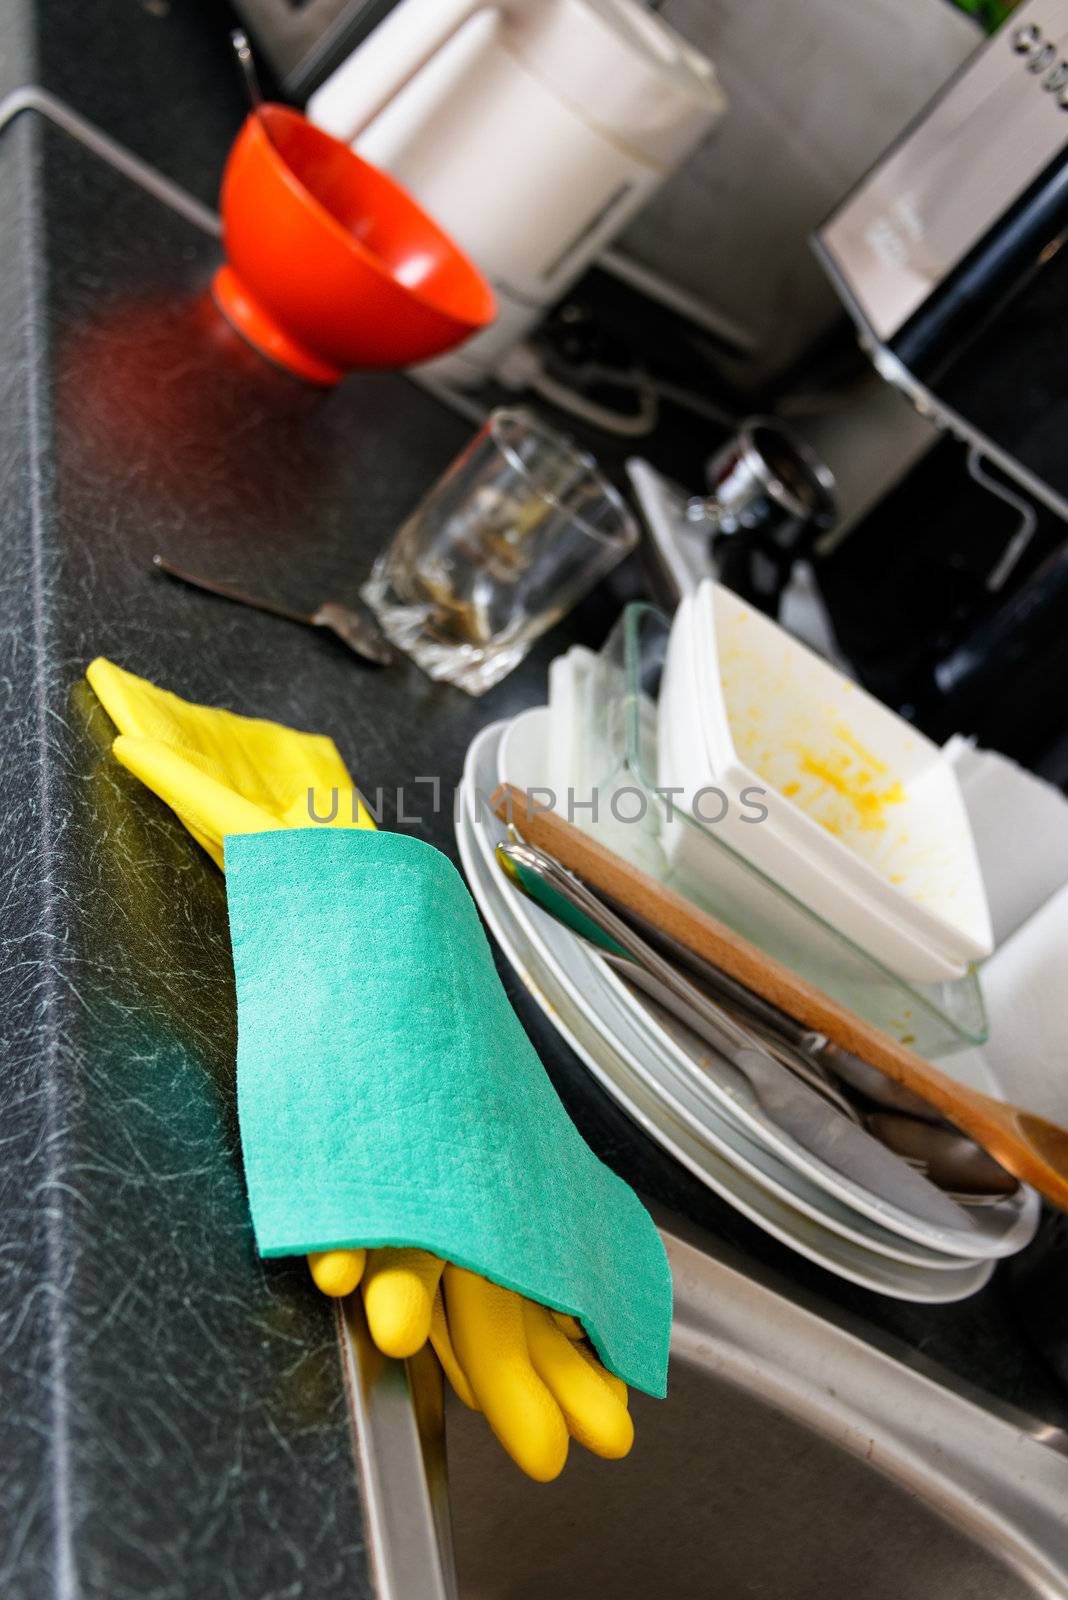 Dirty dishes in a kitchen by dutourdumonde